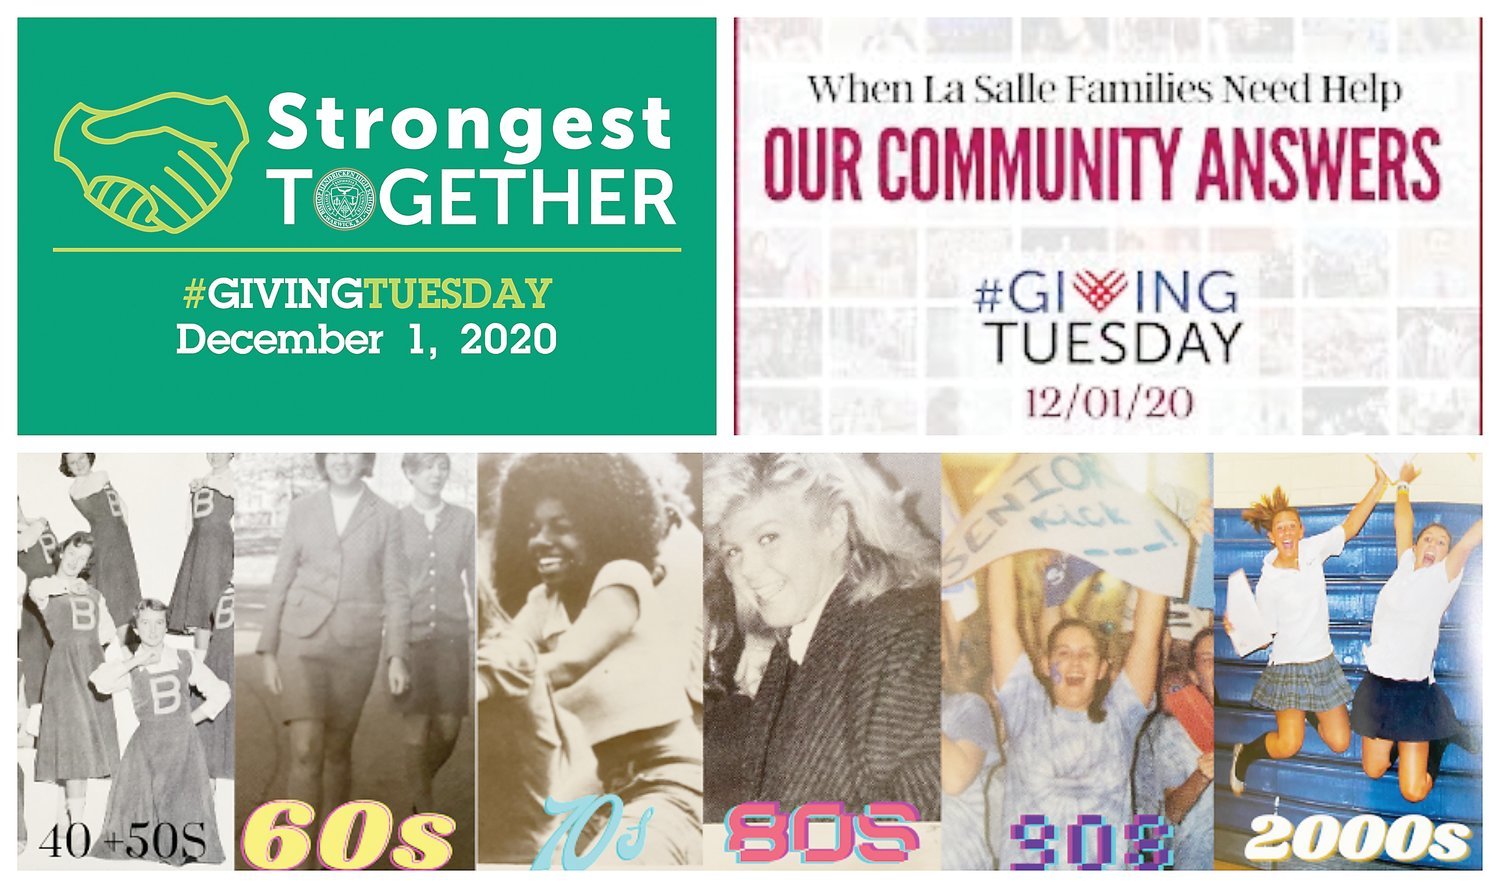 This compilation of promotional materials produced by Bishop Hendricken, La Salle Academy and St. Mary Academy-Bay View shows the impact that Giving Tuesday can have on Catholic education.